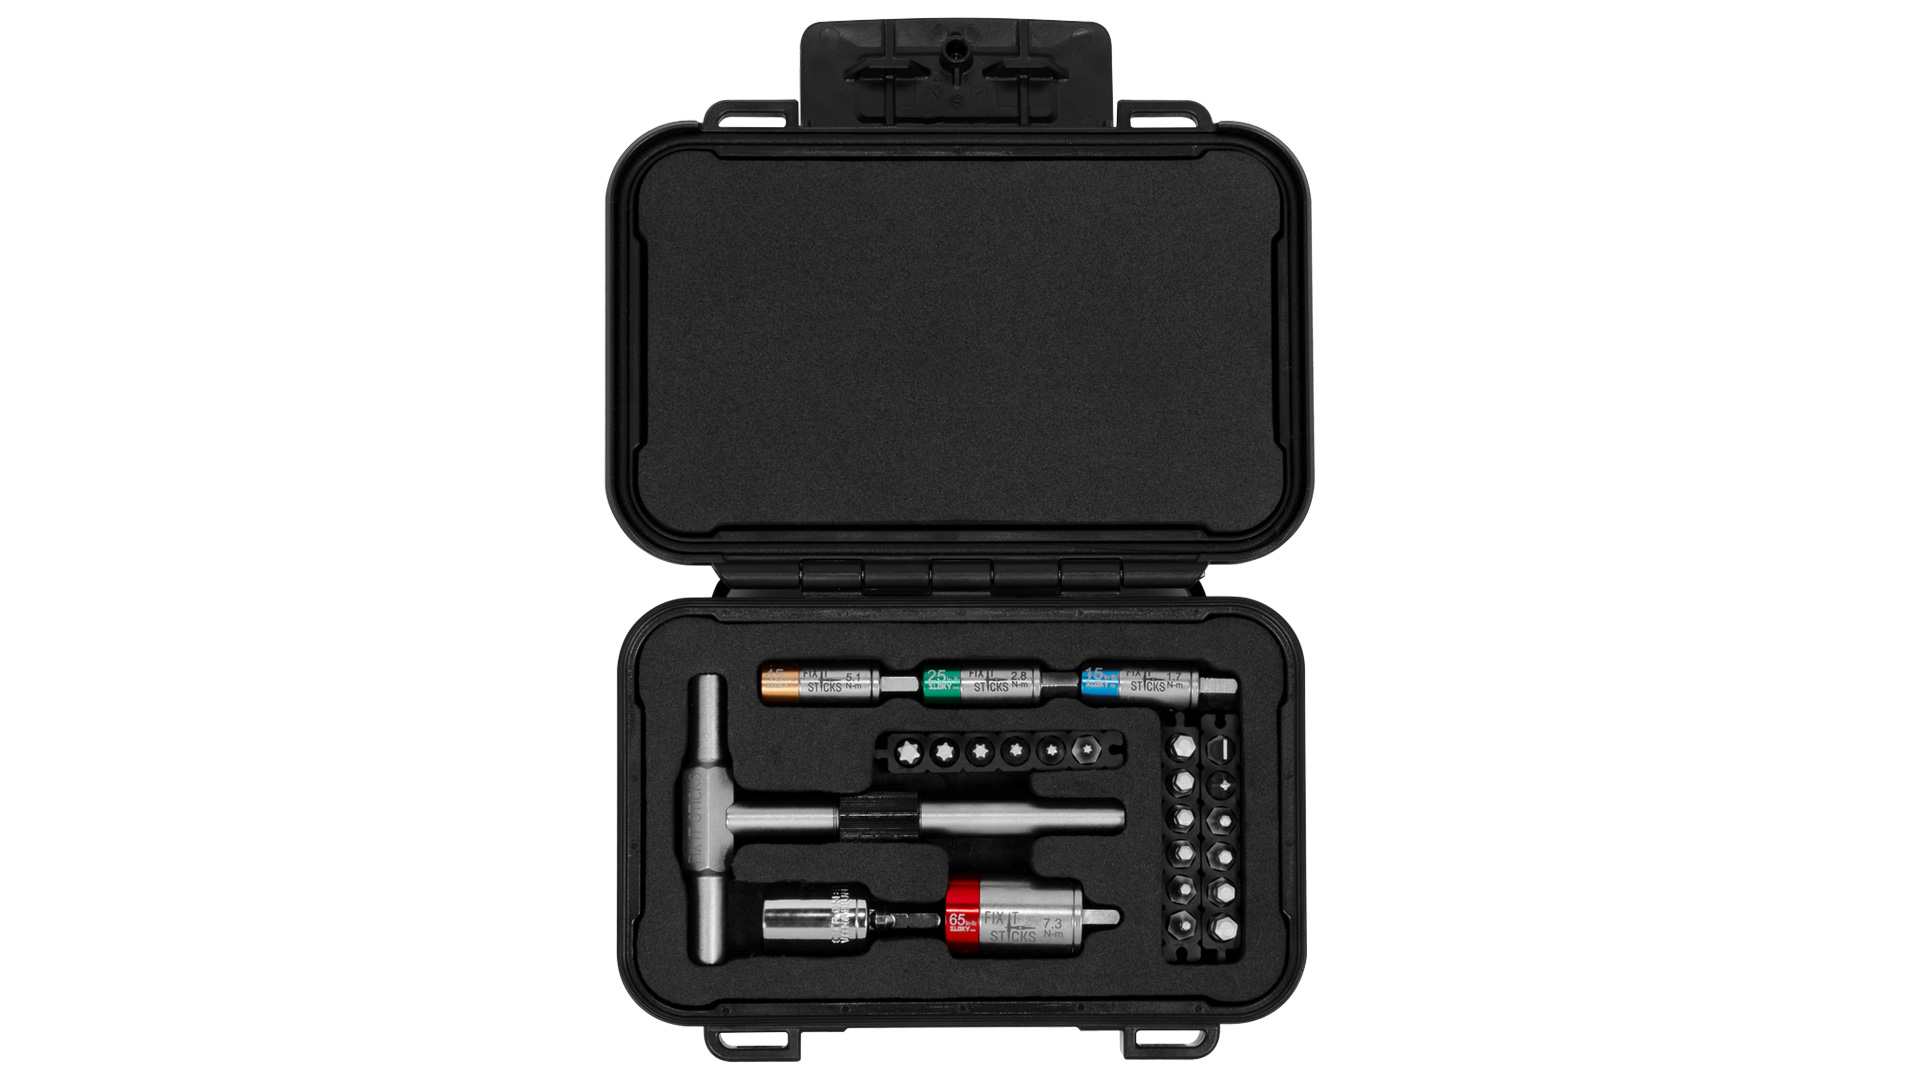  Fix It Sticks Compact Gun Maintenance Kit with Mini All-in-One  Torque Driver : Sports & Outdoors